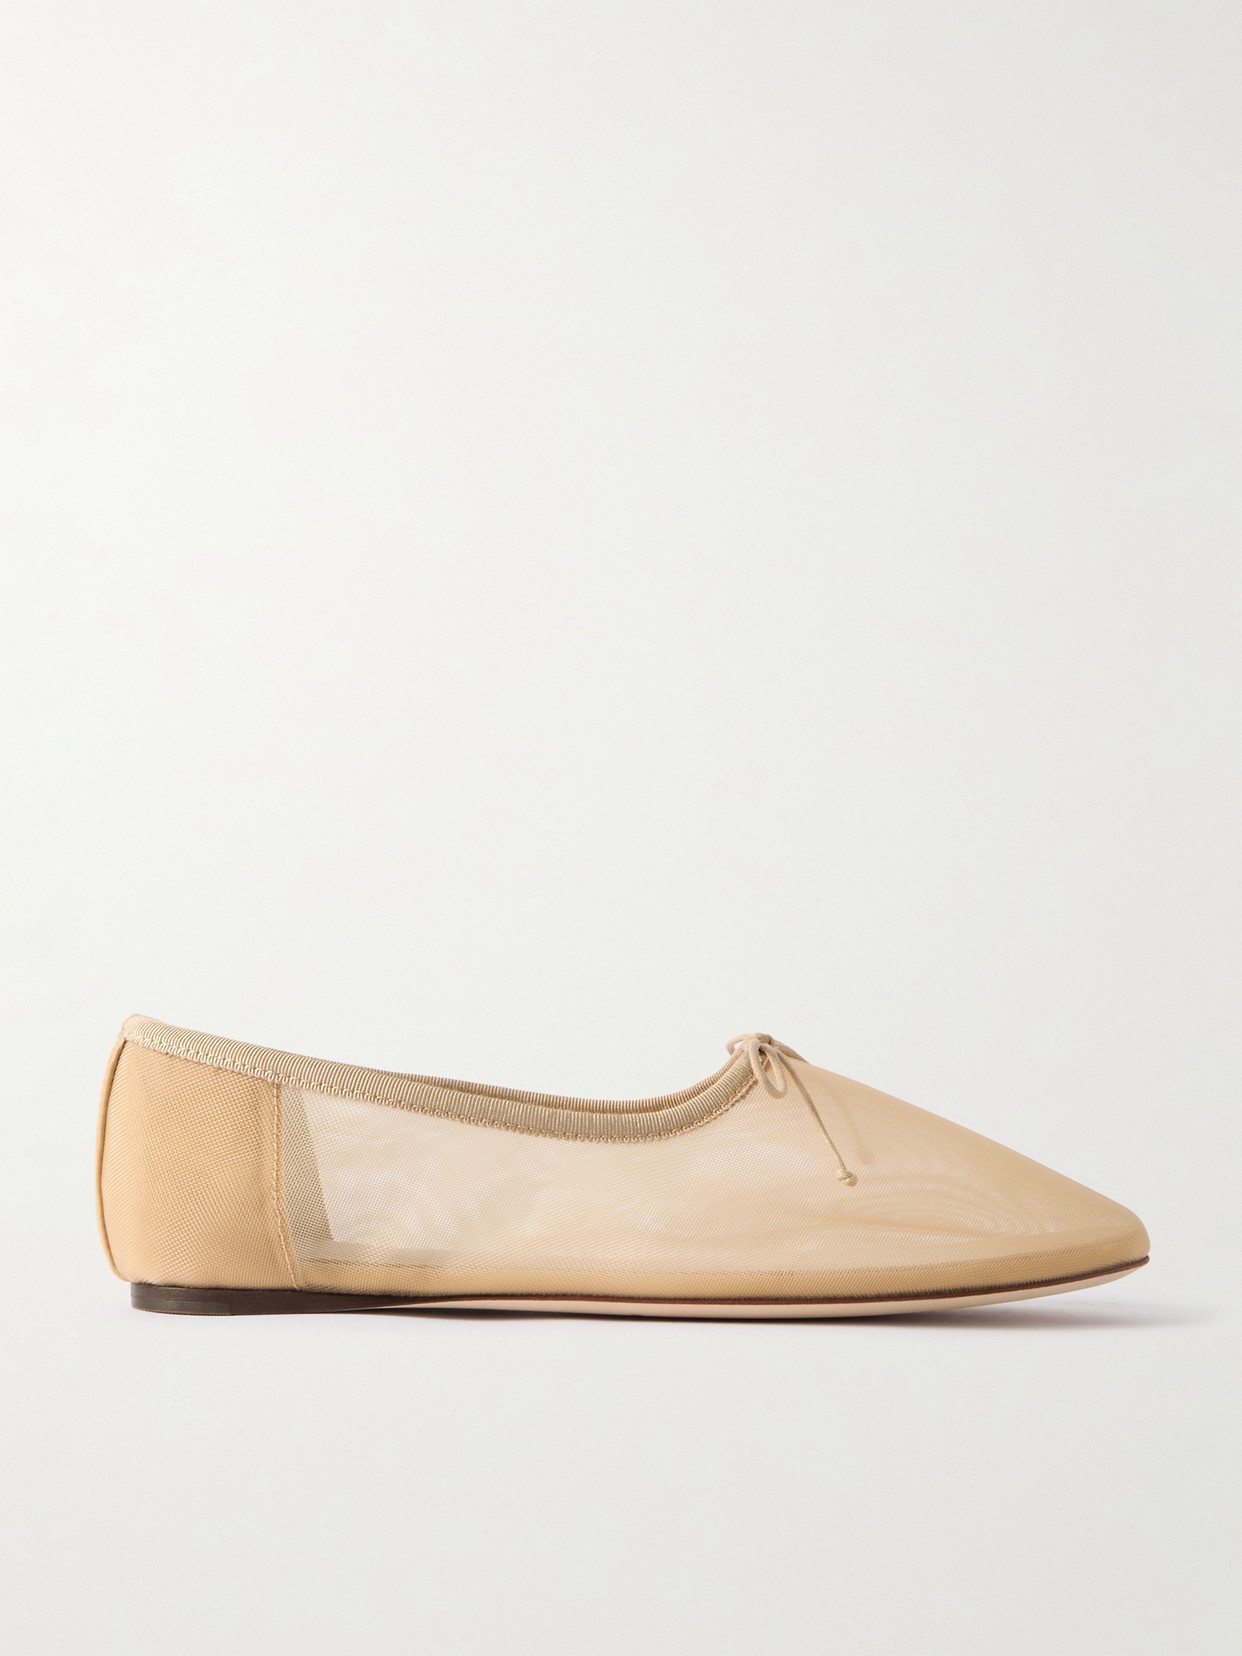 Bow-Embellished Mesh Ballet Flats in tan